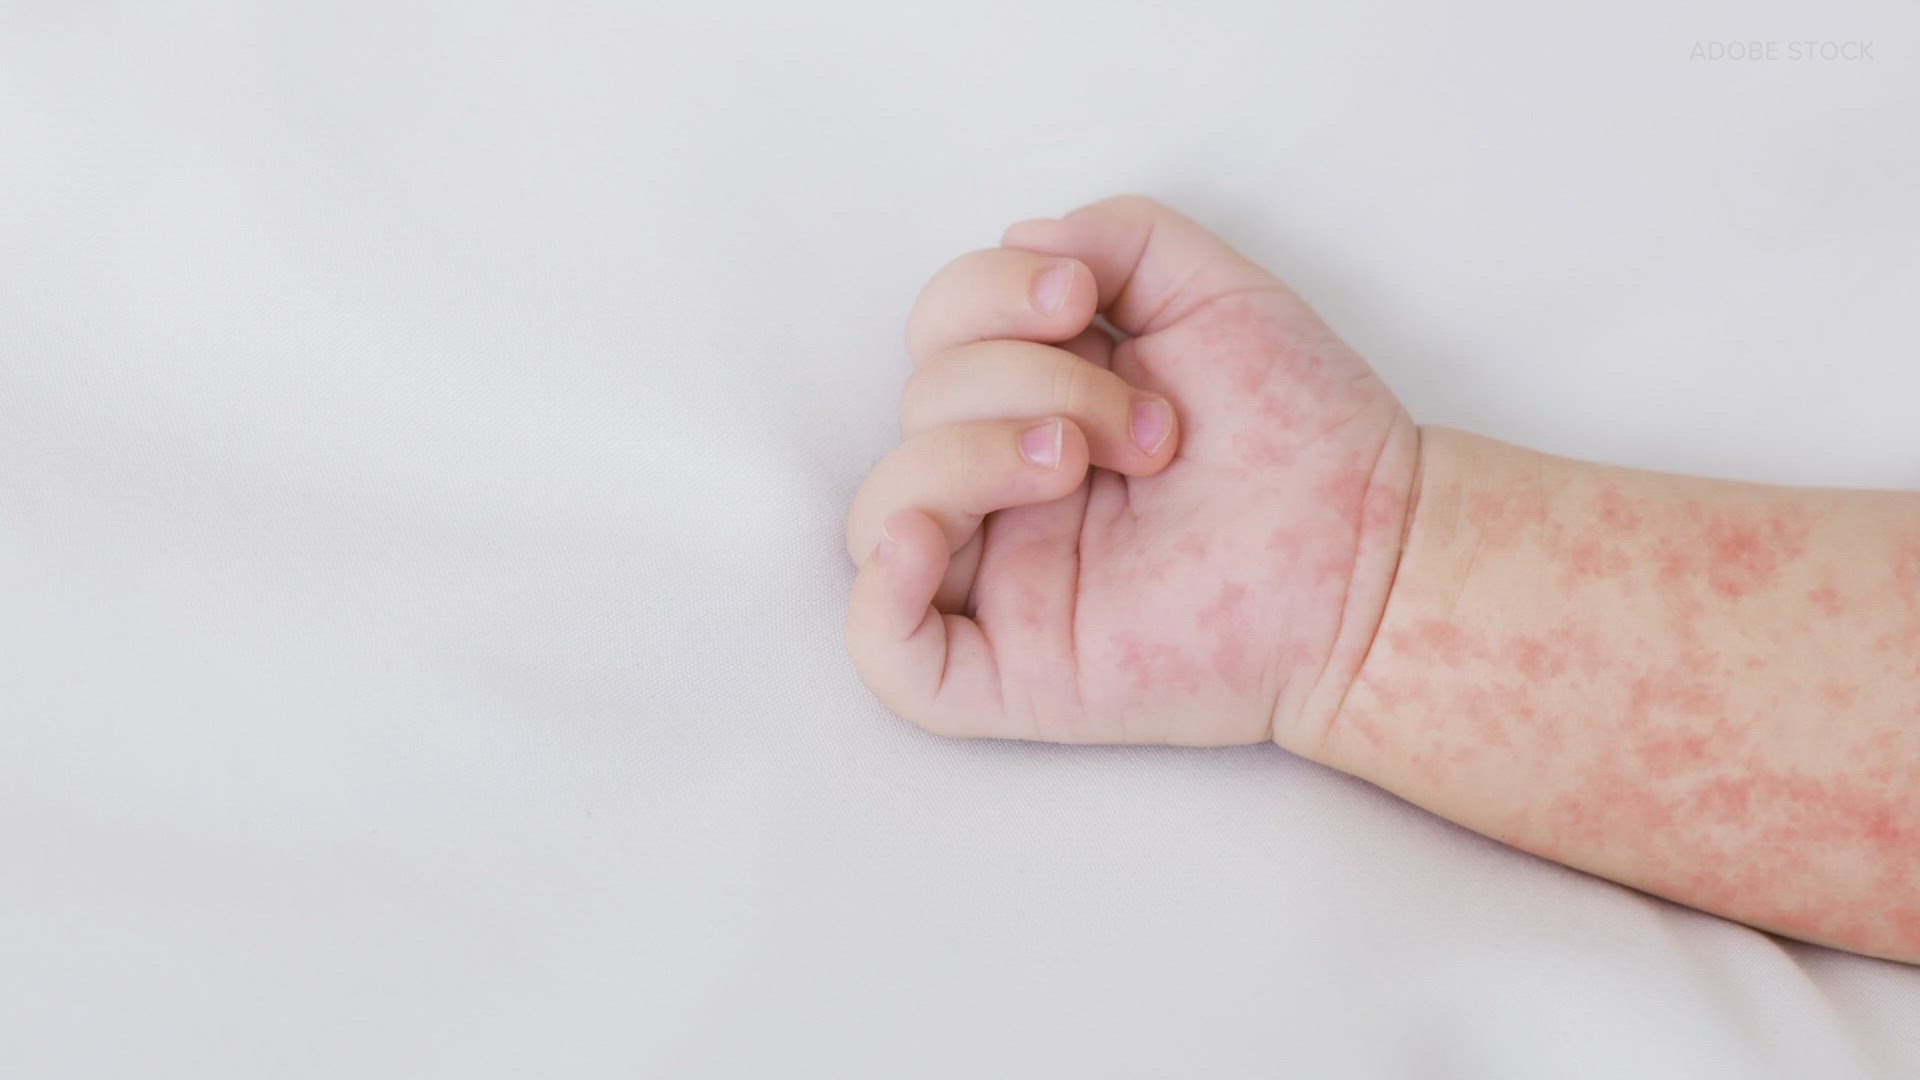 HealthLink talks with state public health officials about childhood immunization rates in WA amid a concerning rise in measles cases in the U.S.